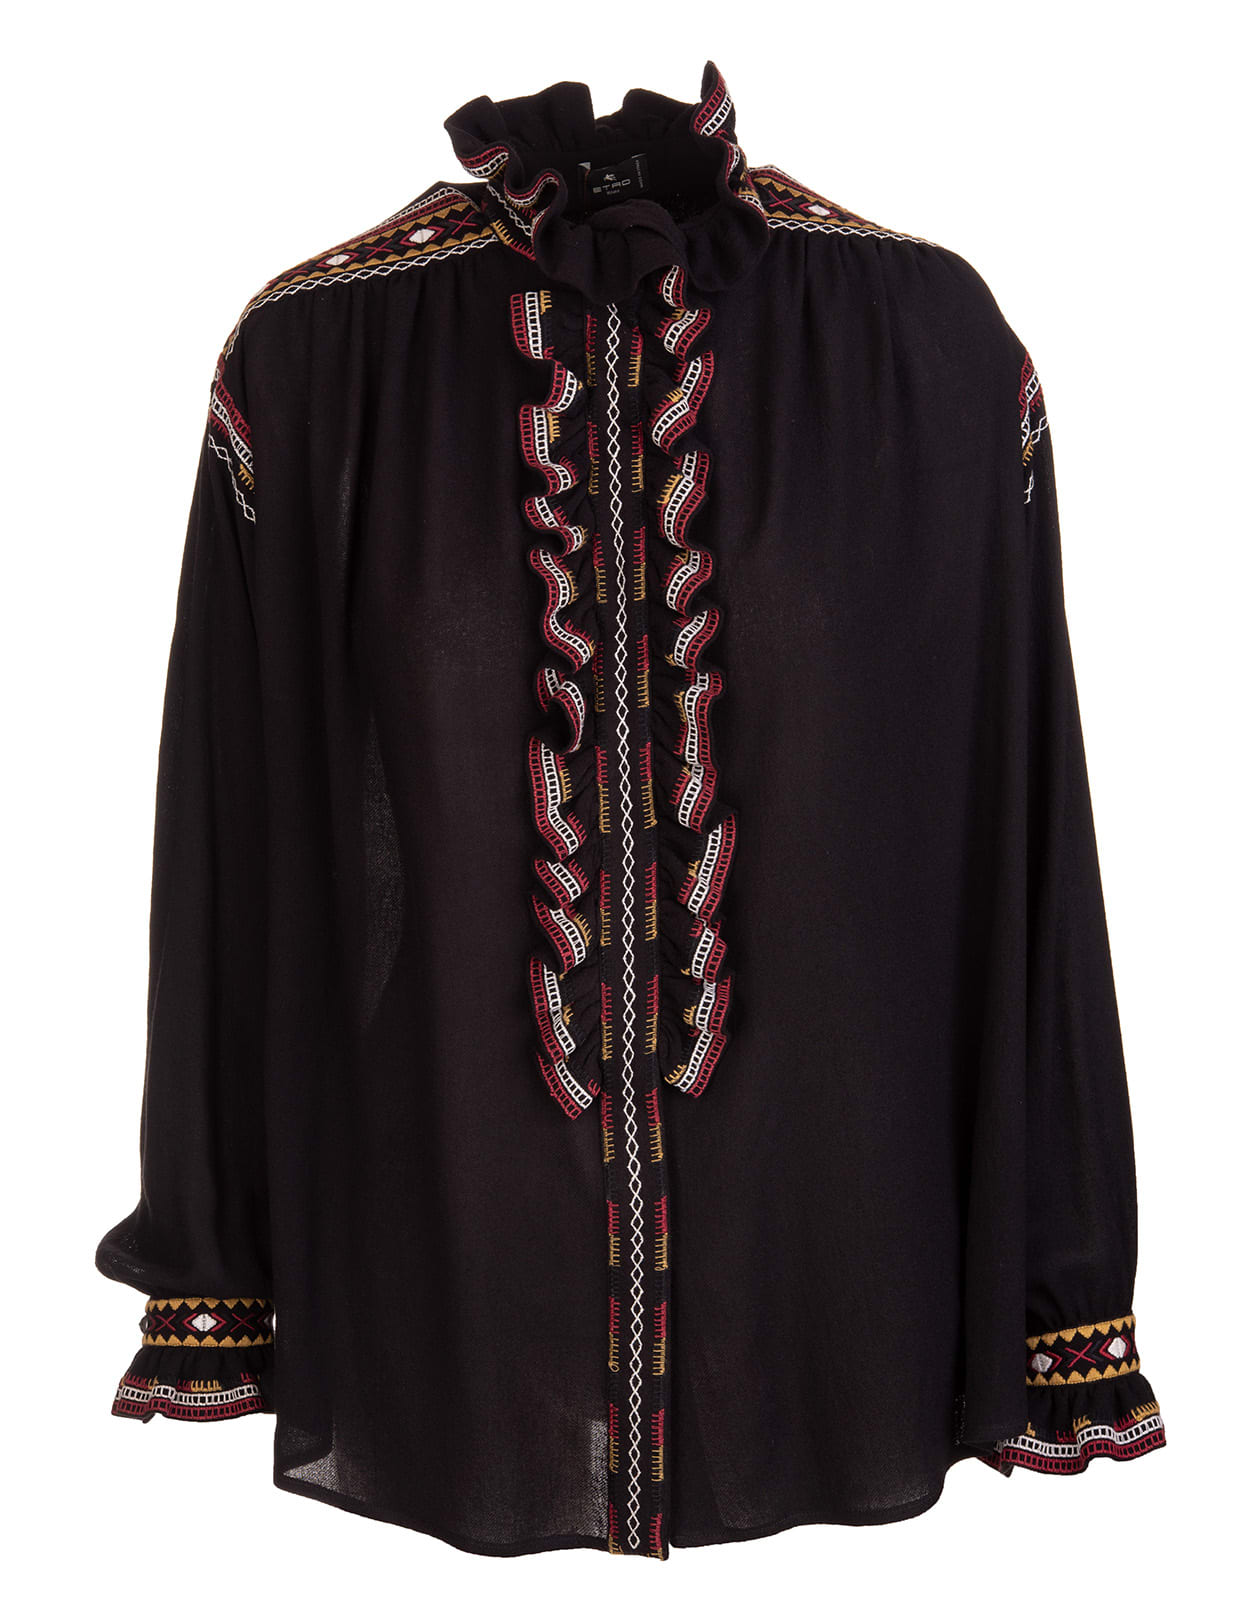 Etro Black Wool Blend Shirt With Ruffles And Contrast Embroidery